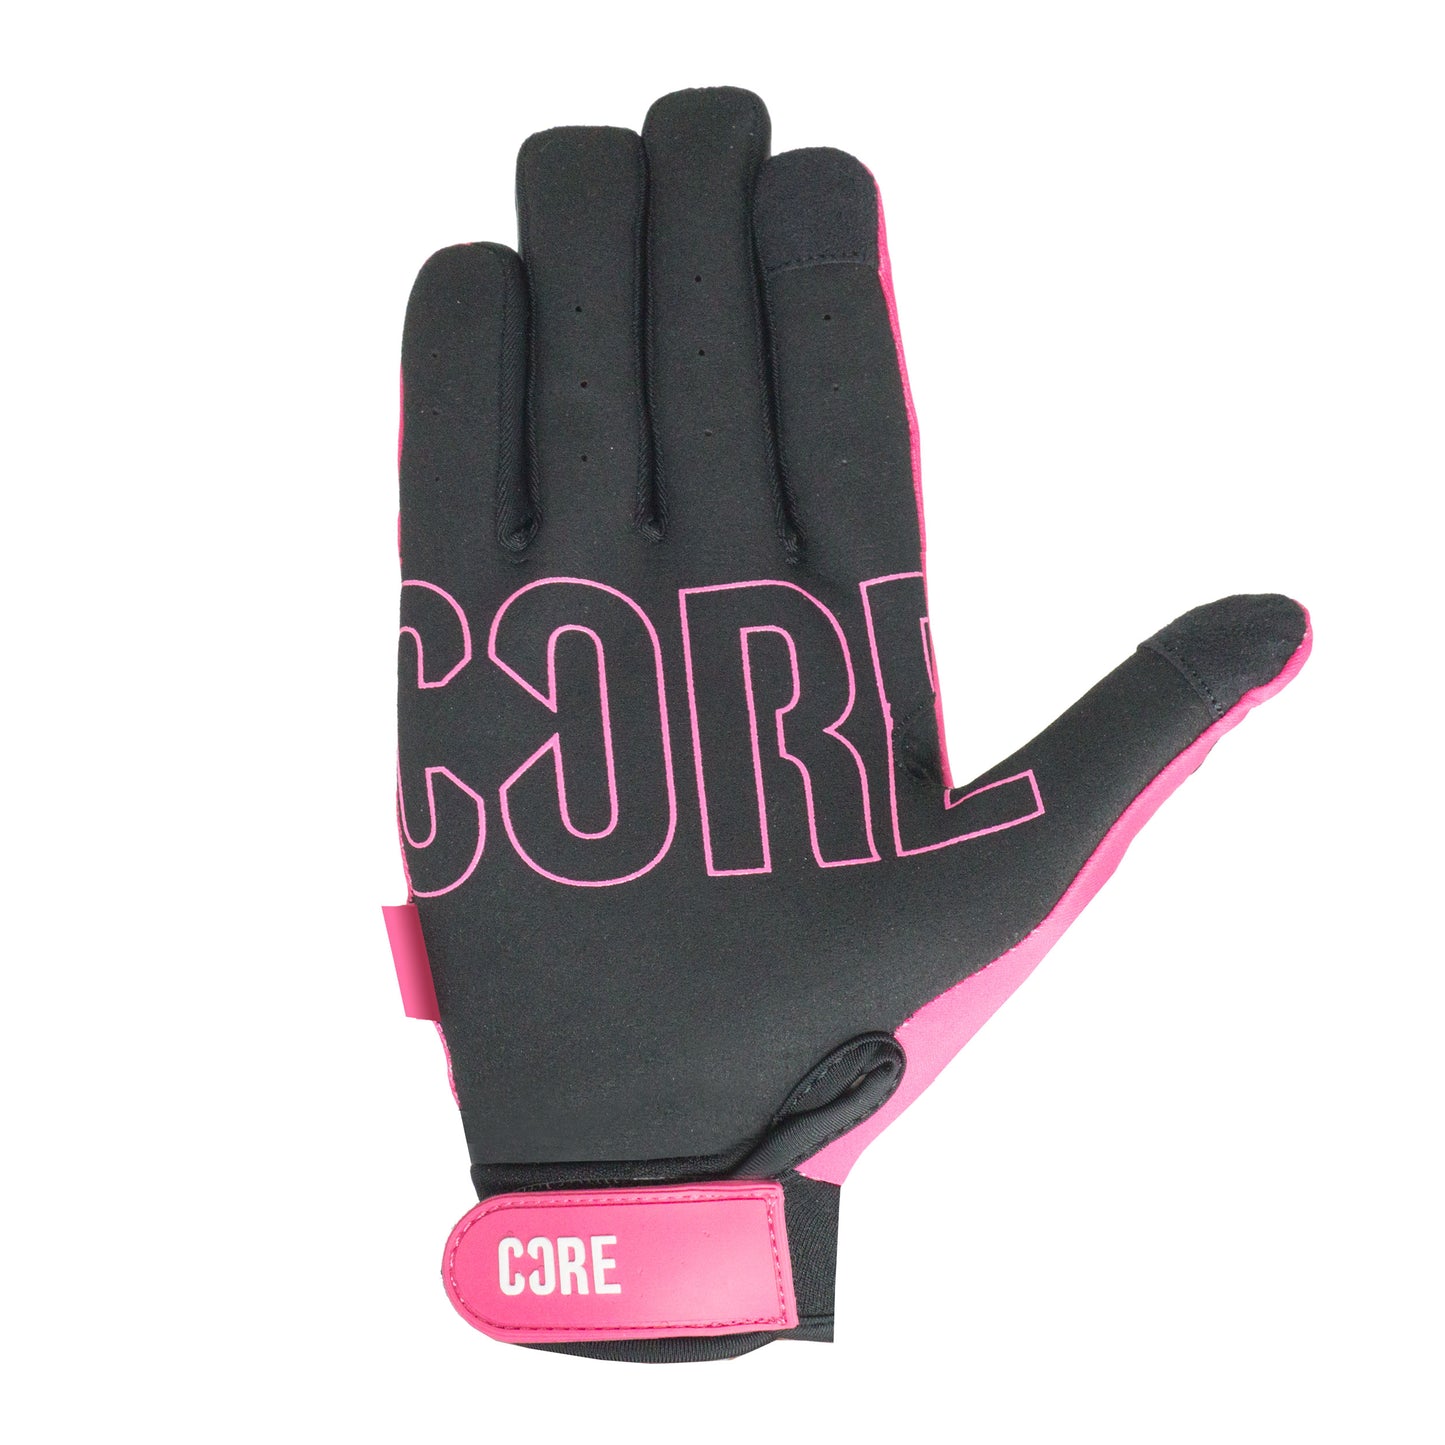 CORE Protection Gloves - Pink - Prime Delux Store